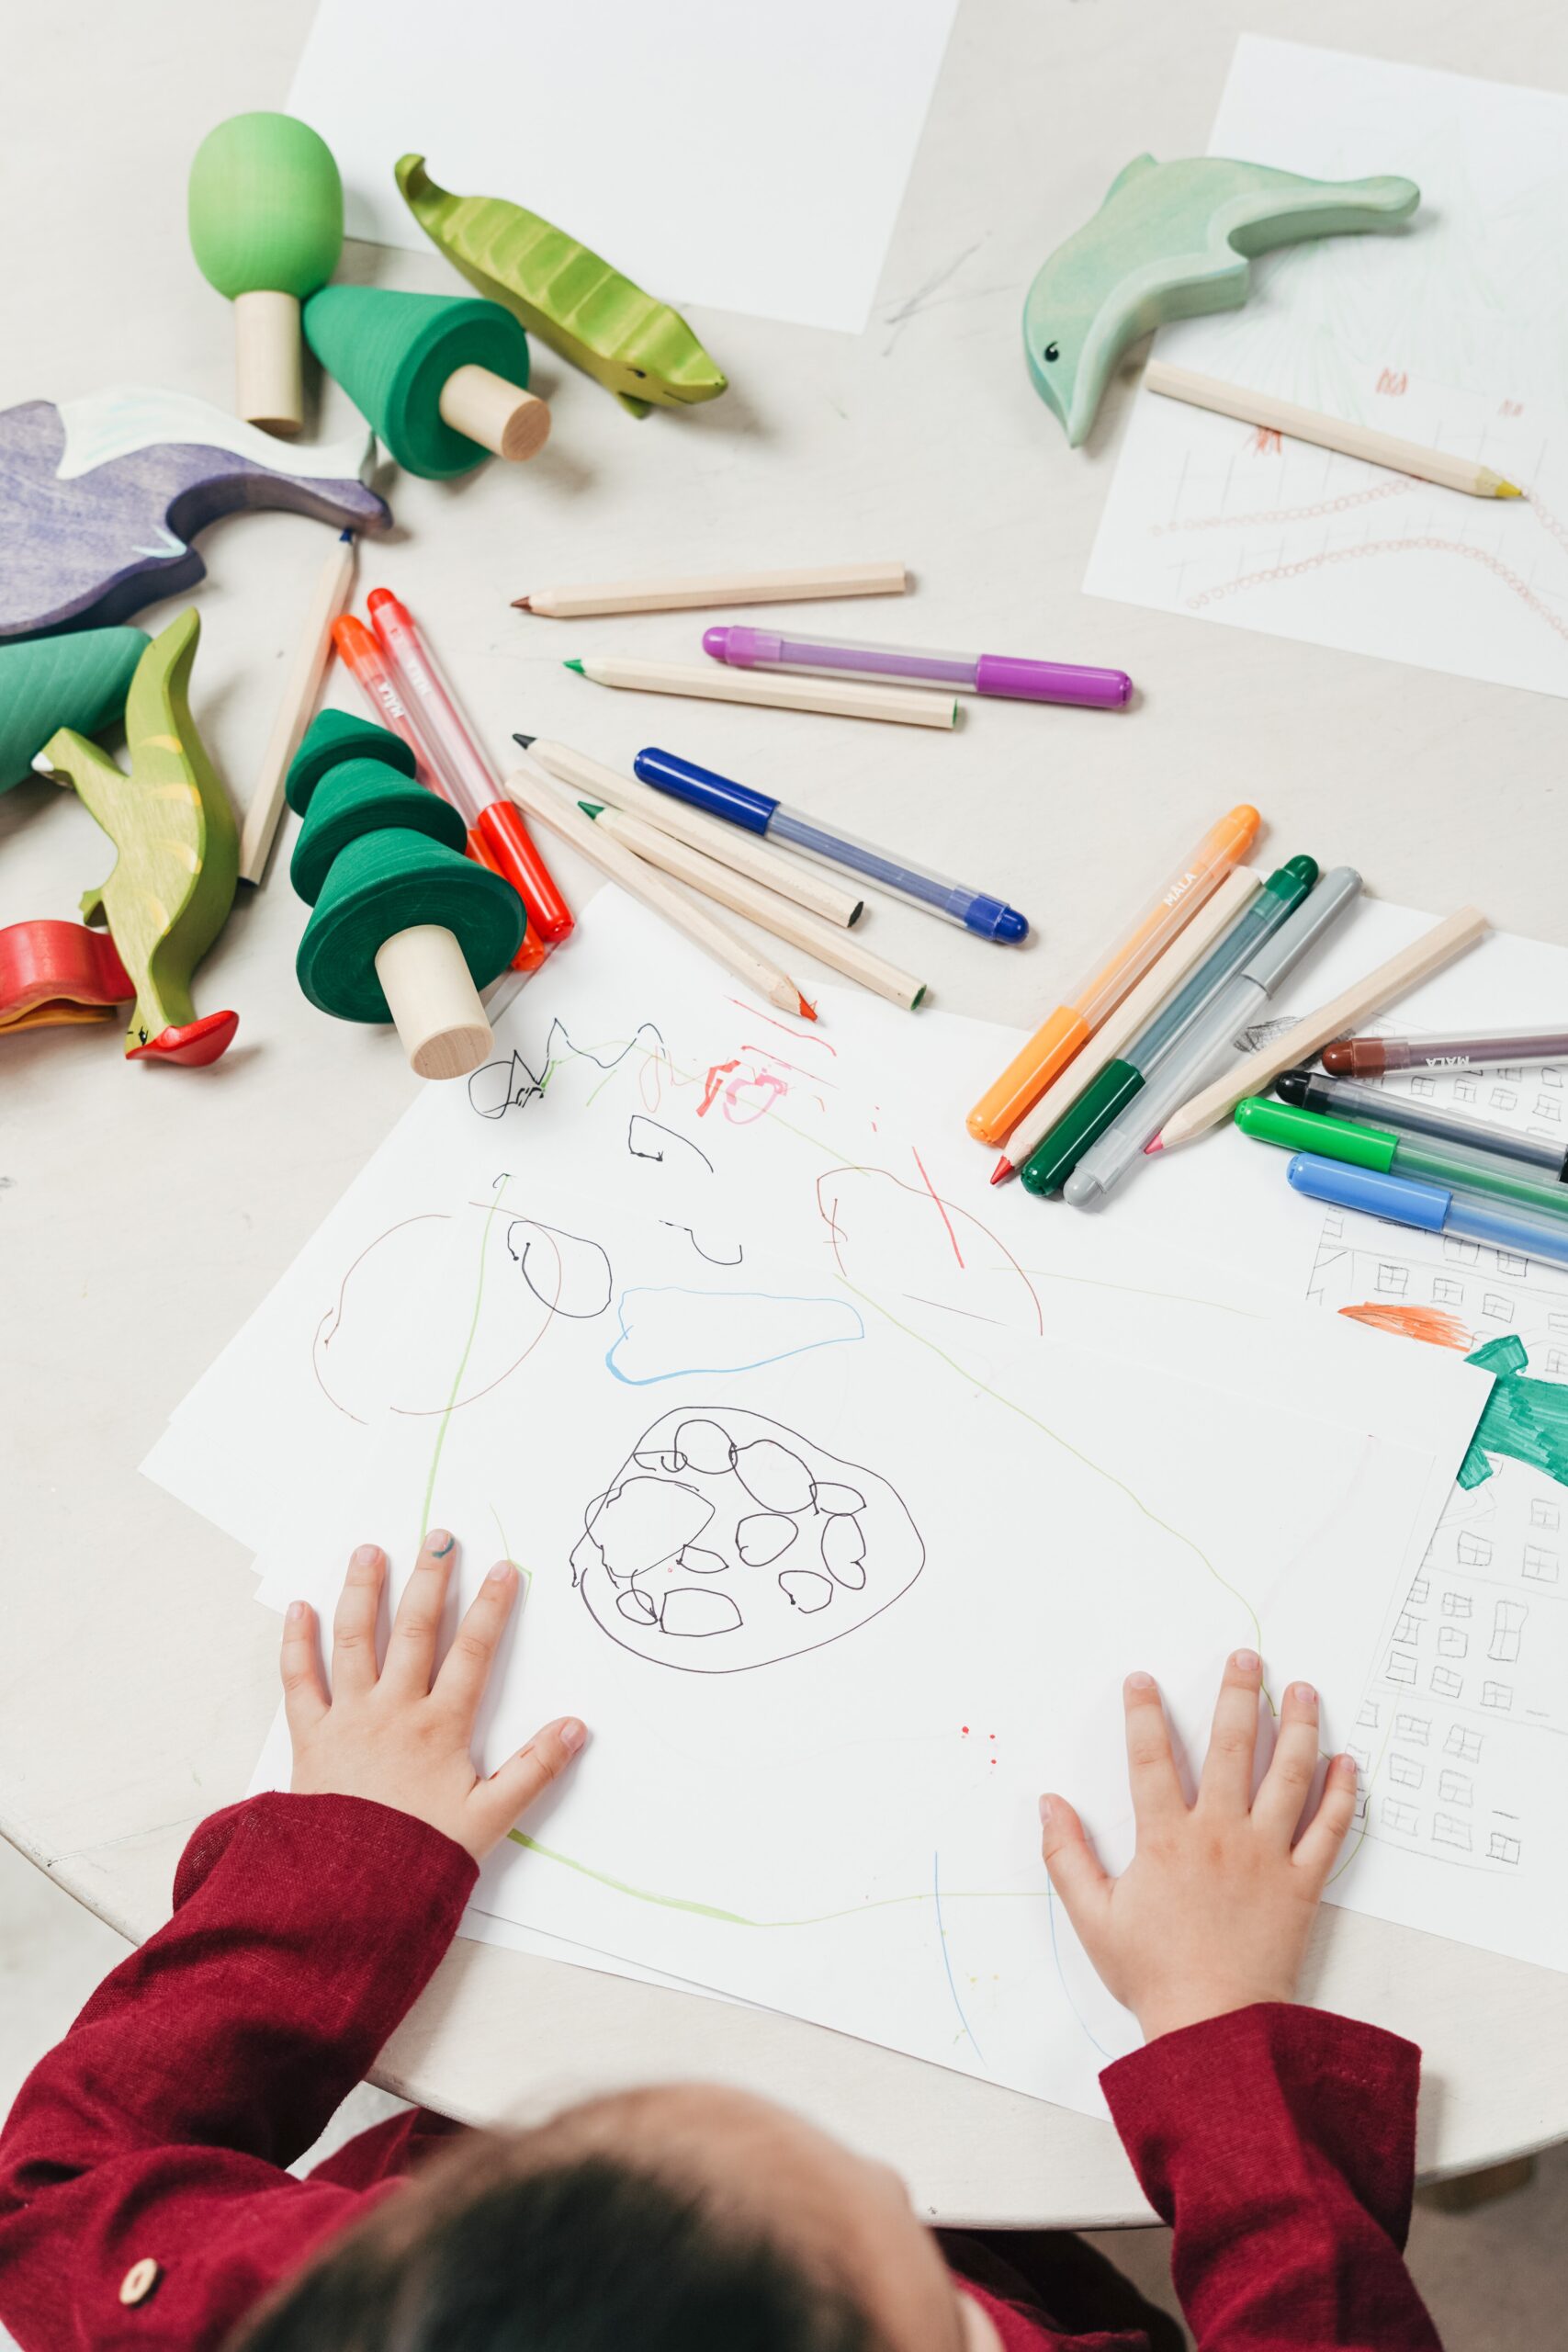 A kid drawing on a white paper image